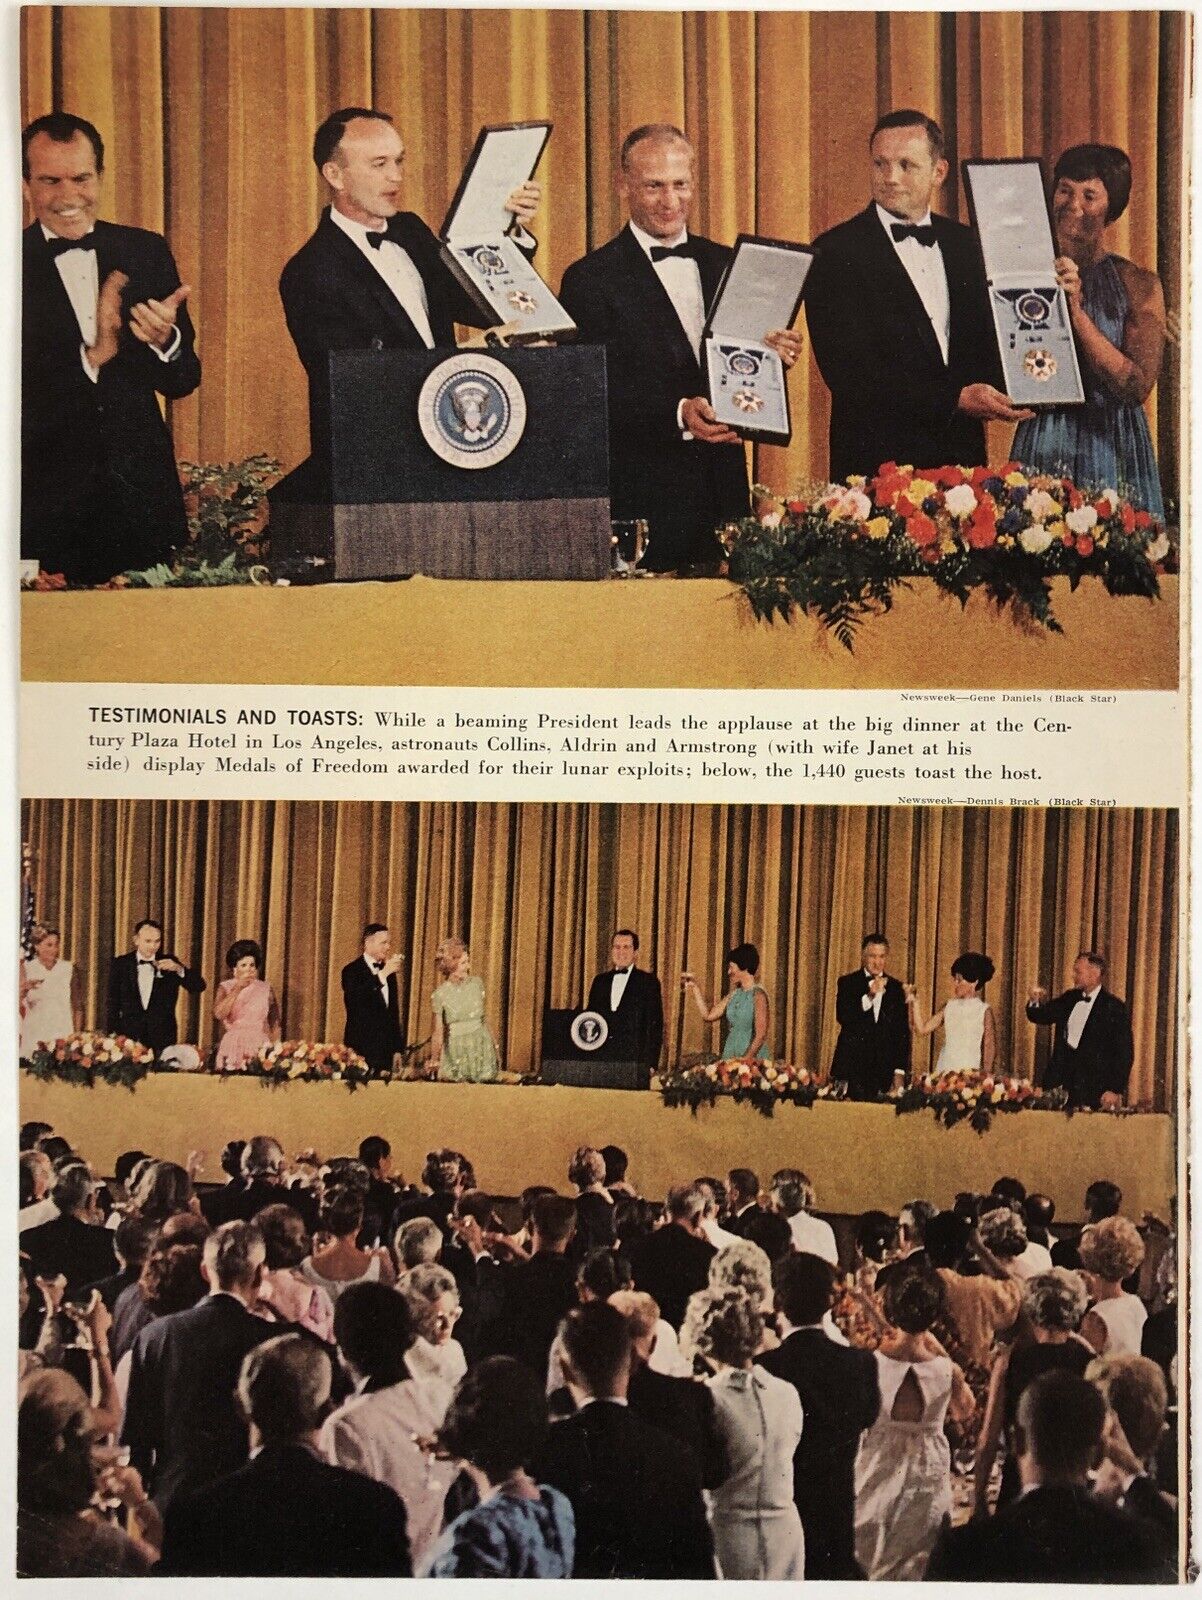 Product Image for APOLLO XI | 1969 CENTURY PLAZA DINNER COLLECTION OF PHOTOGRAPHS AND EPHEMERA